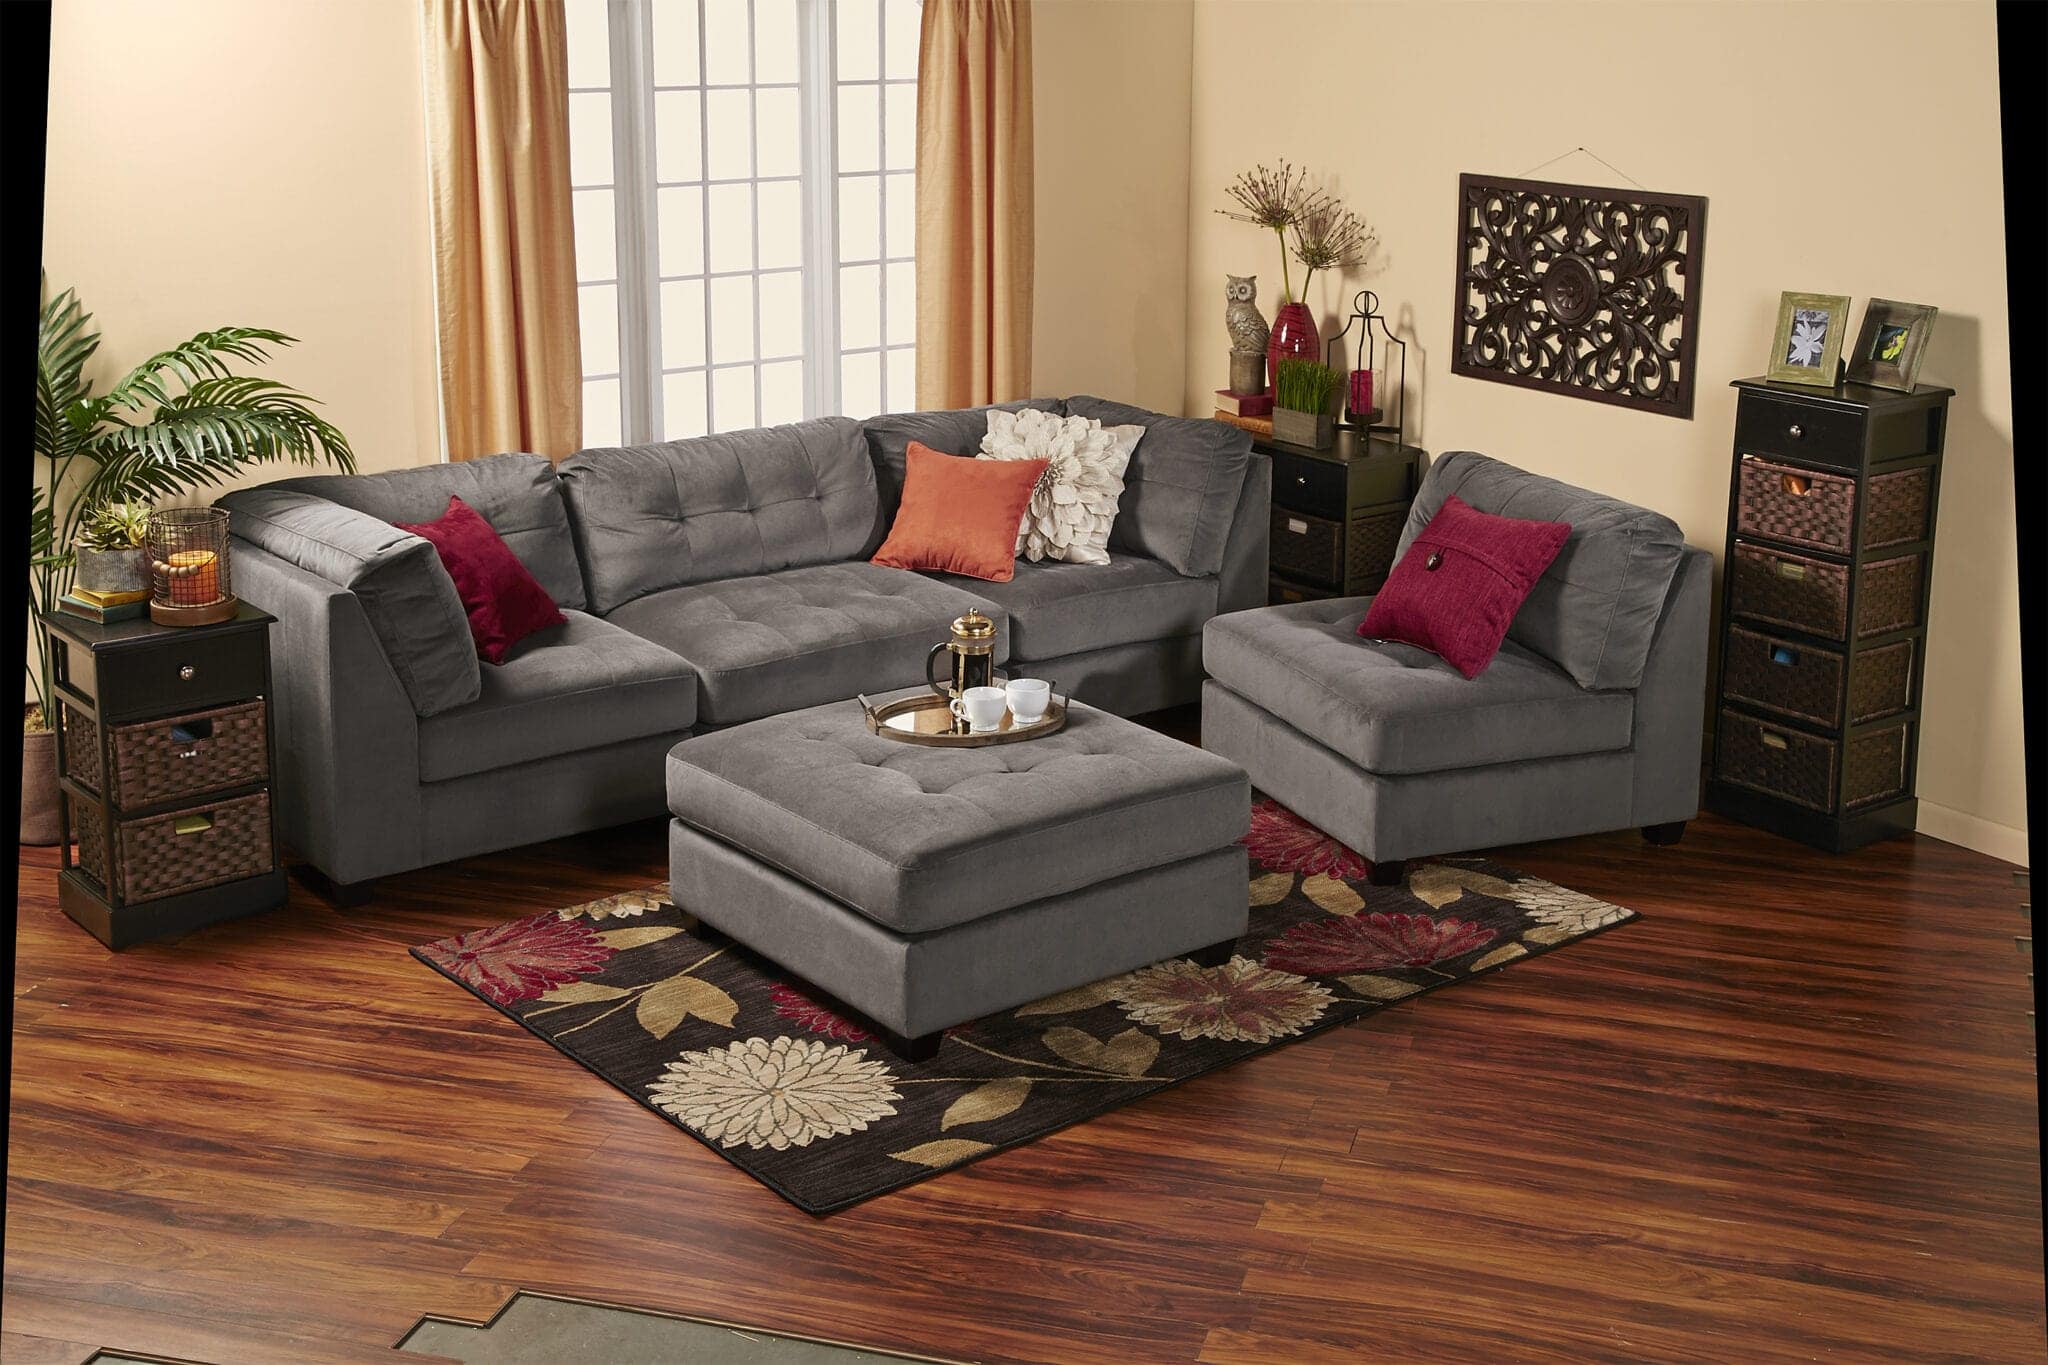 Fred Meyer Truckload Furniture Event Couches Under 300, 5pc Dining